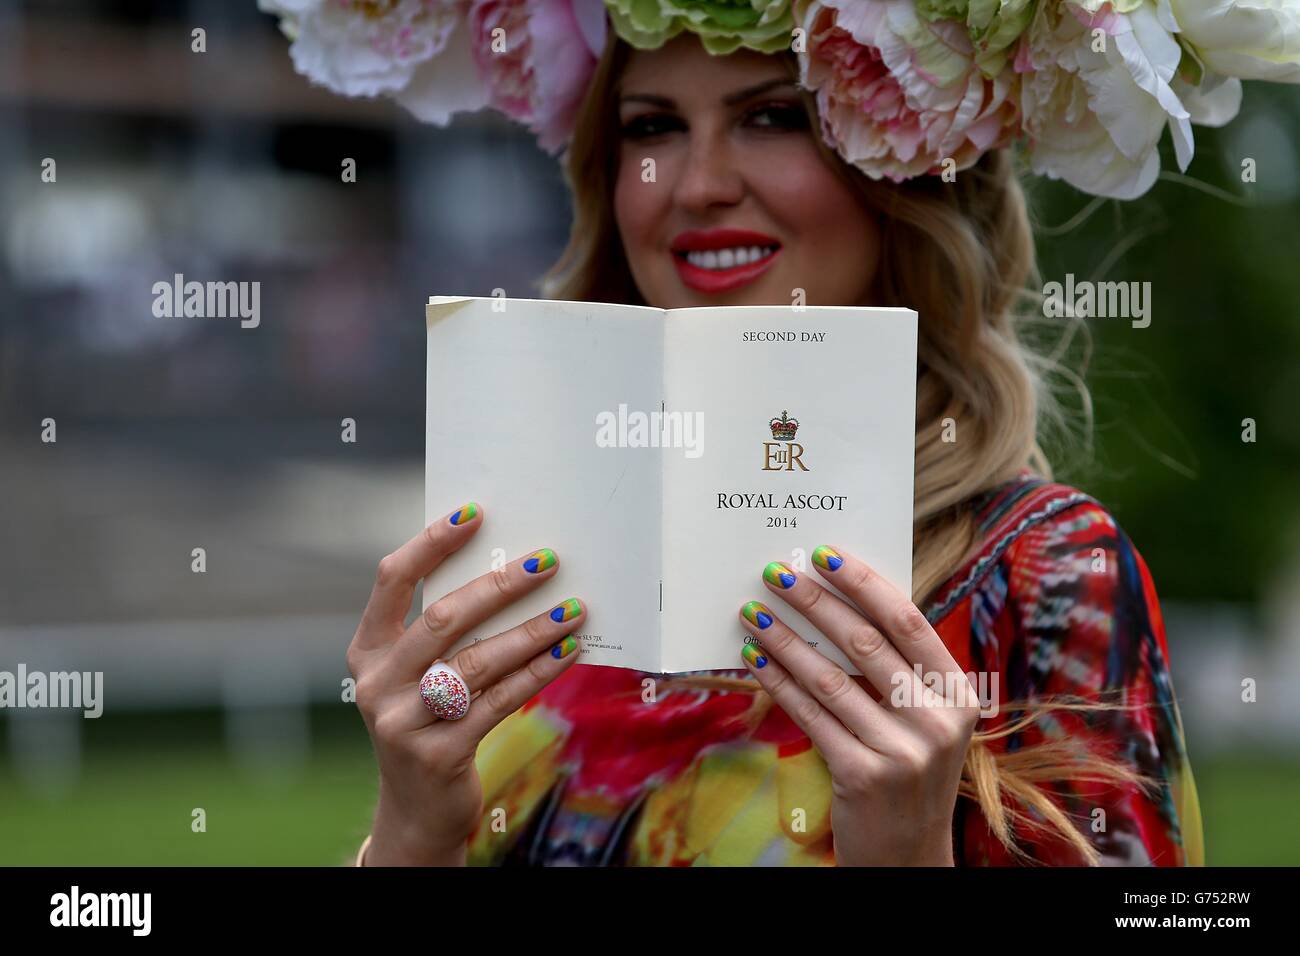 Racegoer Natalia Kapchuk with nails painted in support of Brazil's FIFA World Cup campaign during Day Two of the 2014 Royal Ascot Meeting at Ascot Racecourse, Berkshire. Stock Photo